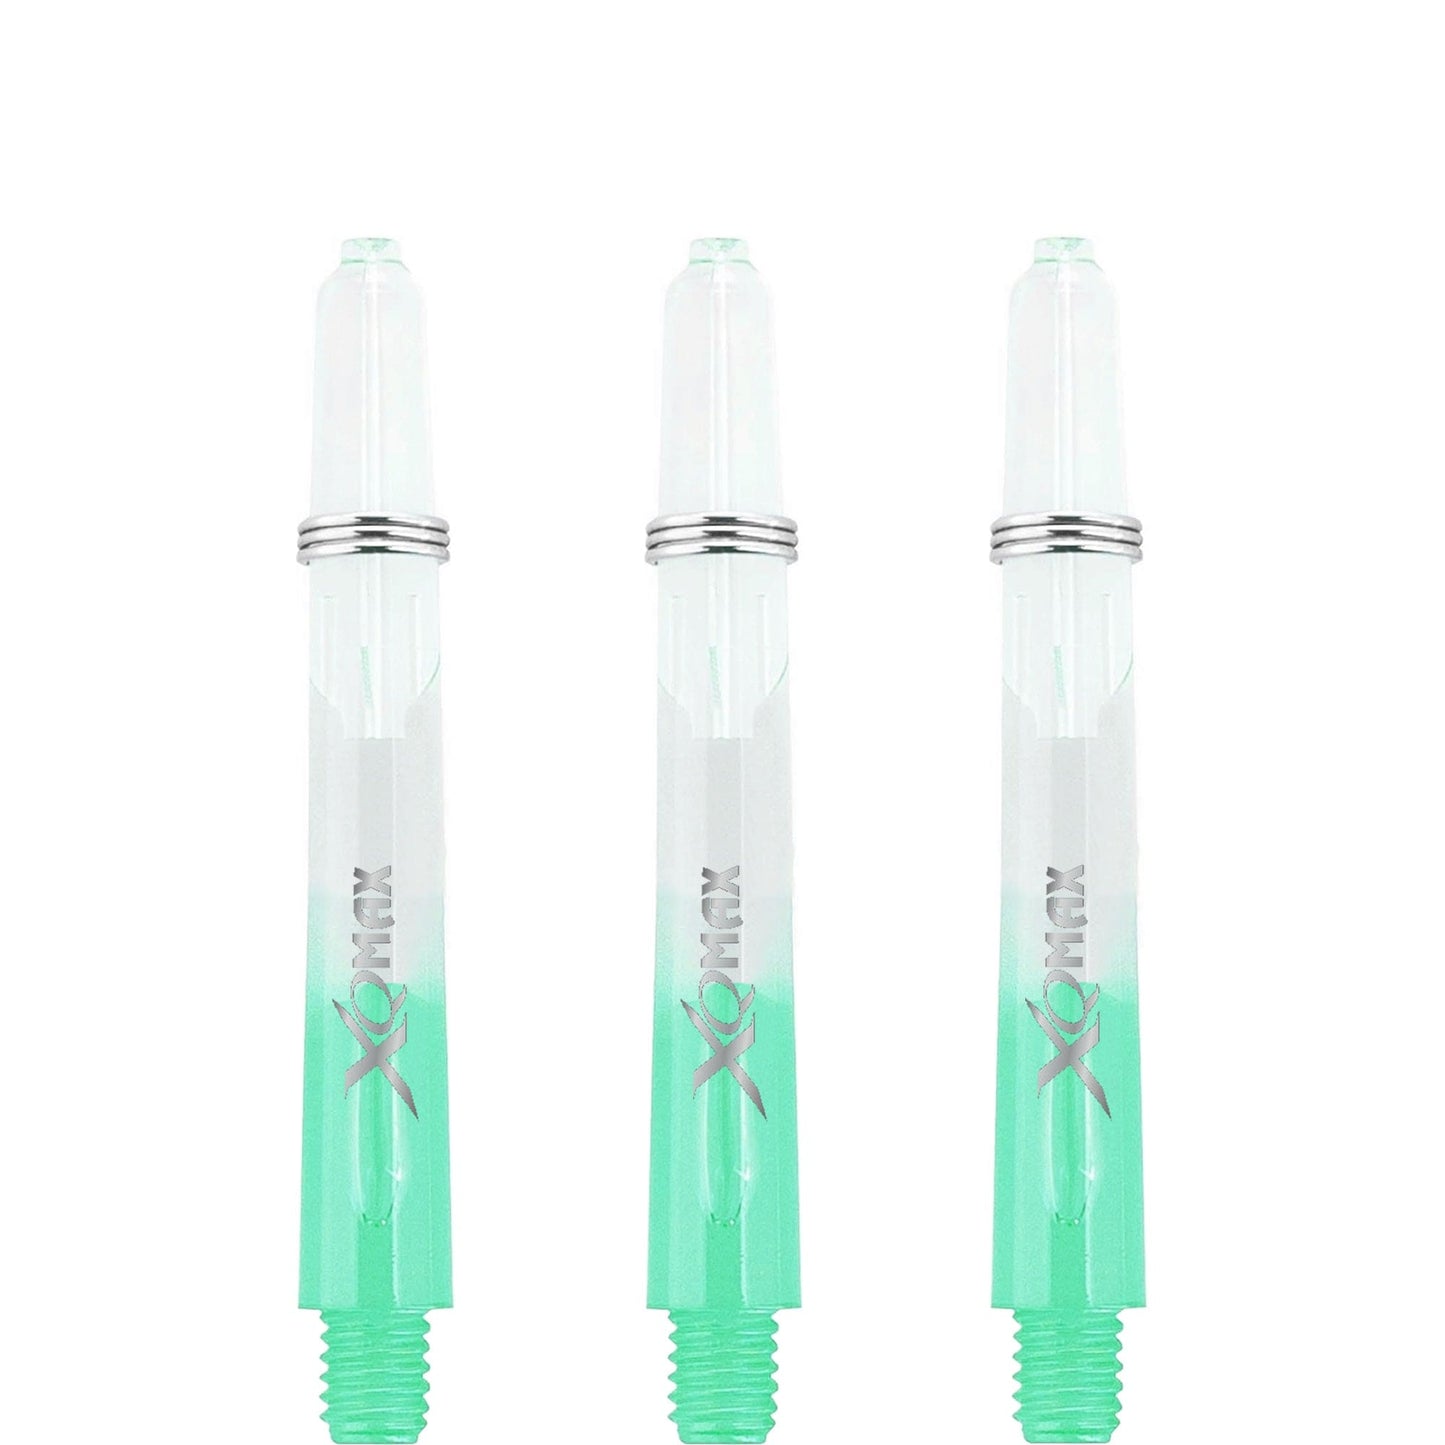 XQMax Gradient Polycarbonate Dart Shafts - with Logo - includes Springs - Transparent & Green Tweenie